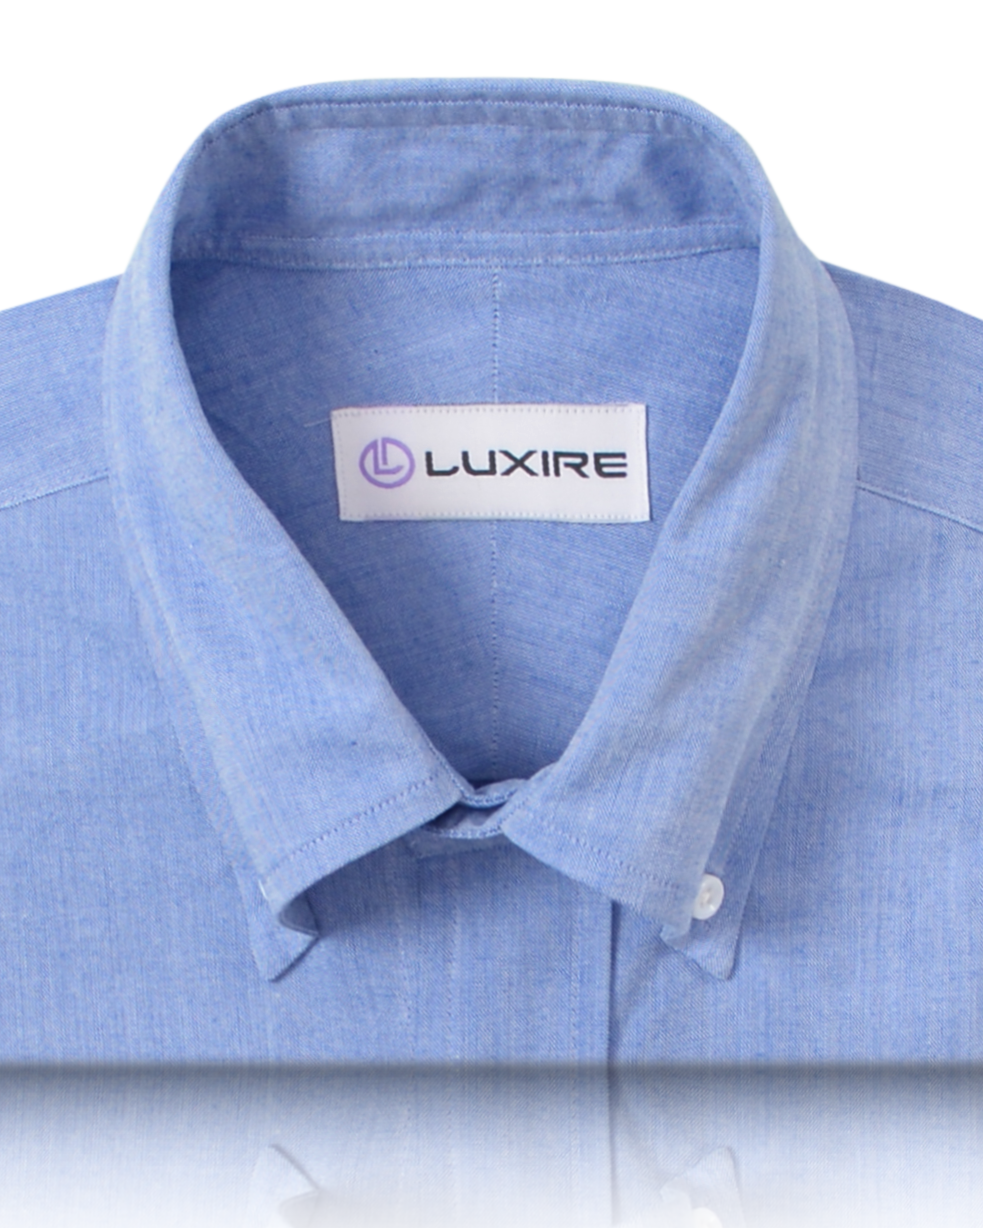 Collar of the custom oxford shirt for men by Luxire in blue slub pinpoint